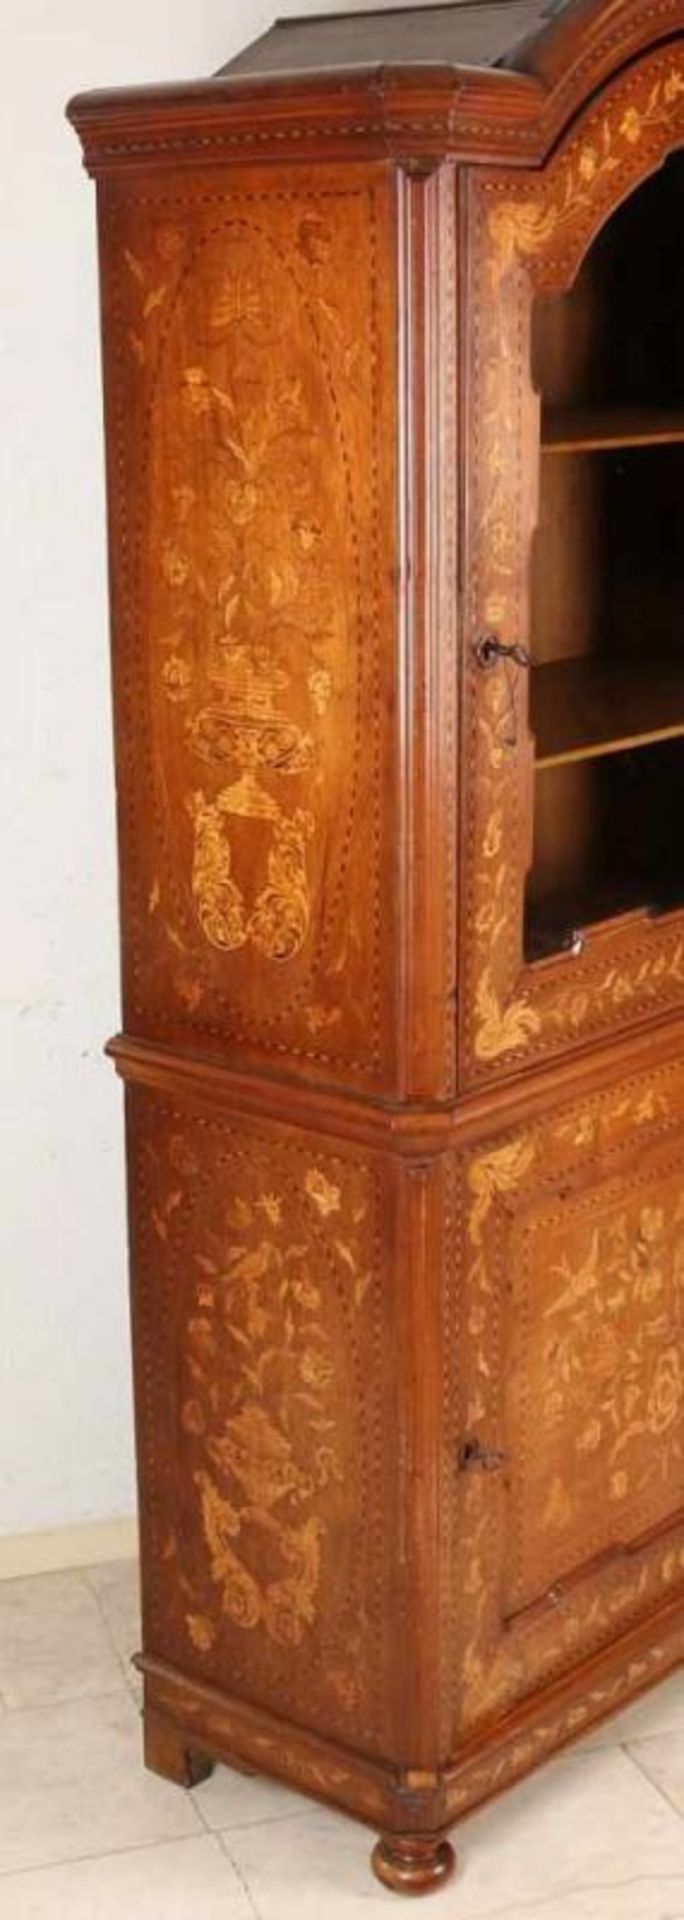 19th century Dutch double door walnut display cabinet with floral intarsia and birds. Also on sides. - Bild 2 aus 2